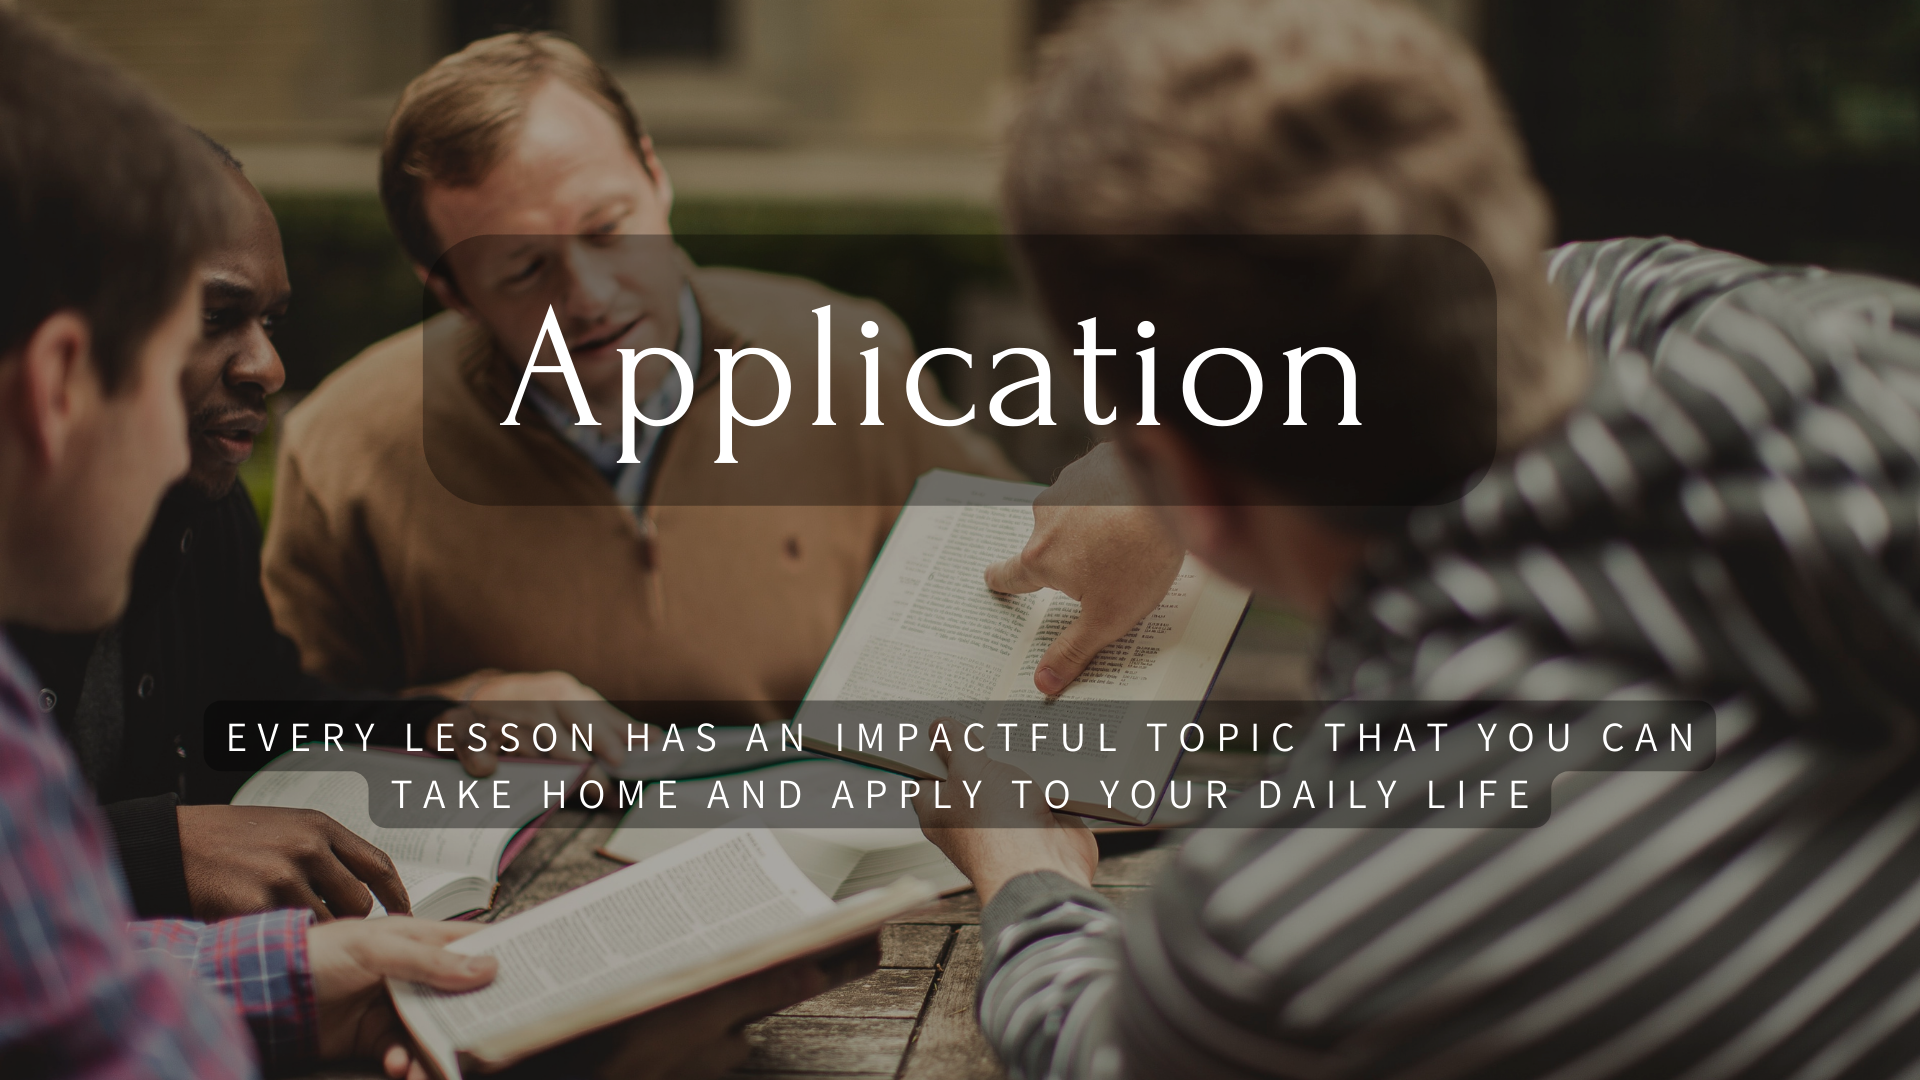 Application: An opportunity to learn and grow